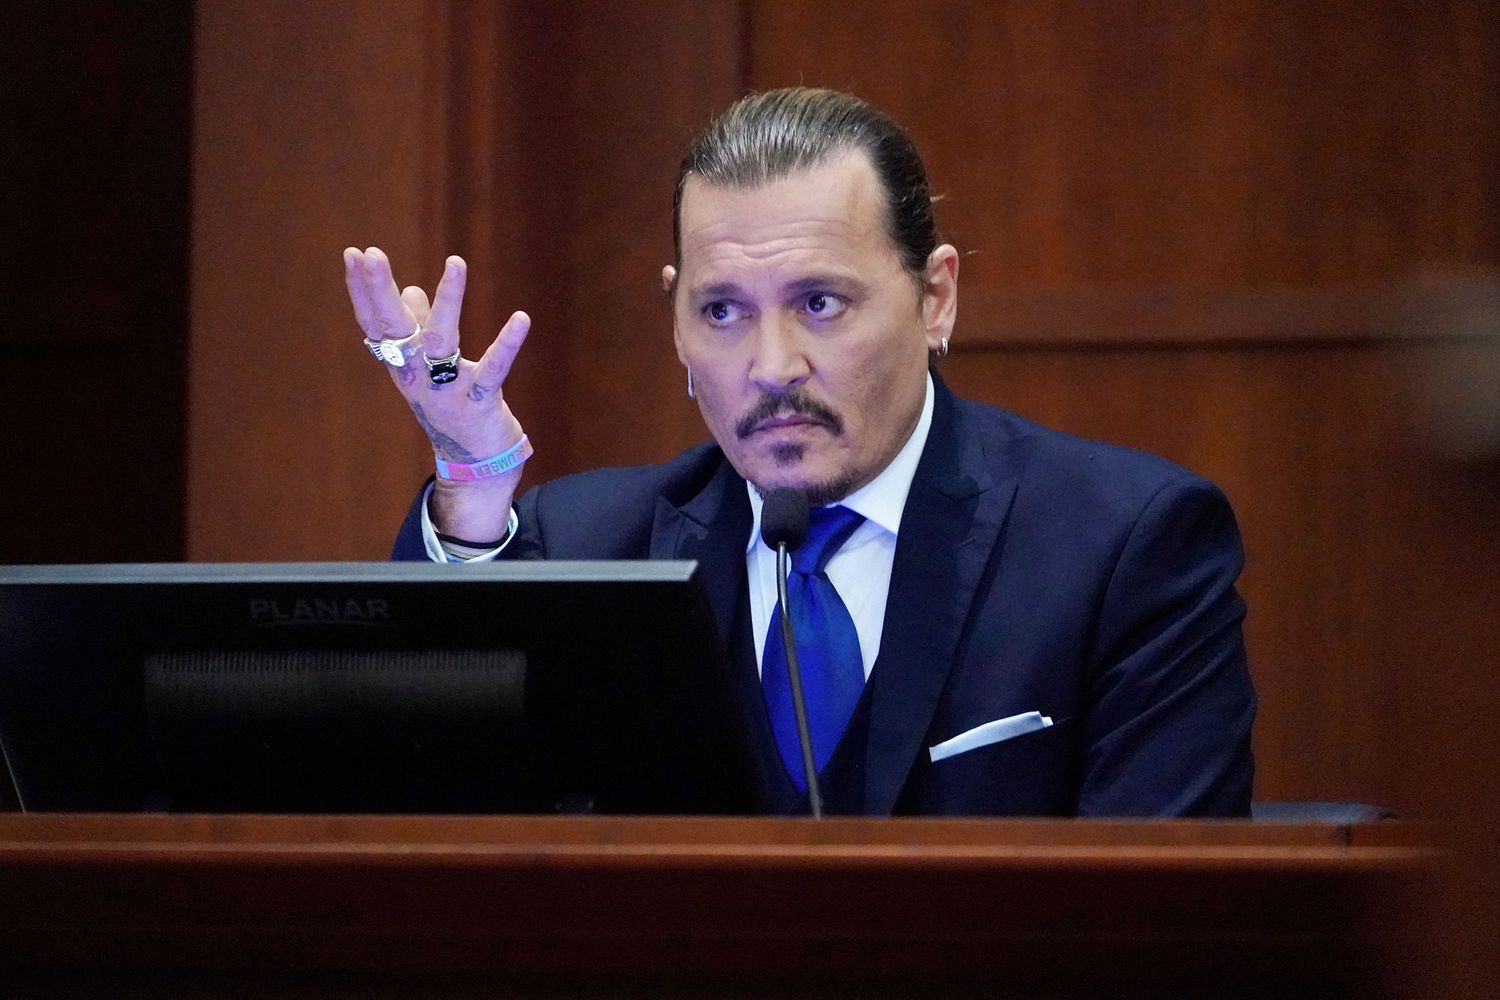 Actor Johnny Depp sits to testify in the courtroom at the Fairfax County Circuit Courthouse in Fairfax, Virginia, April 25, 2022